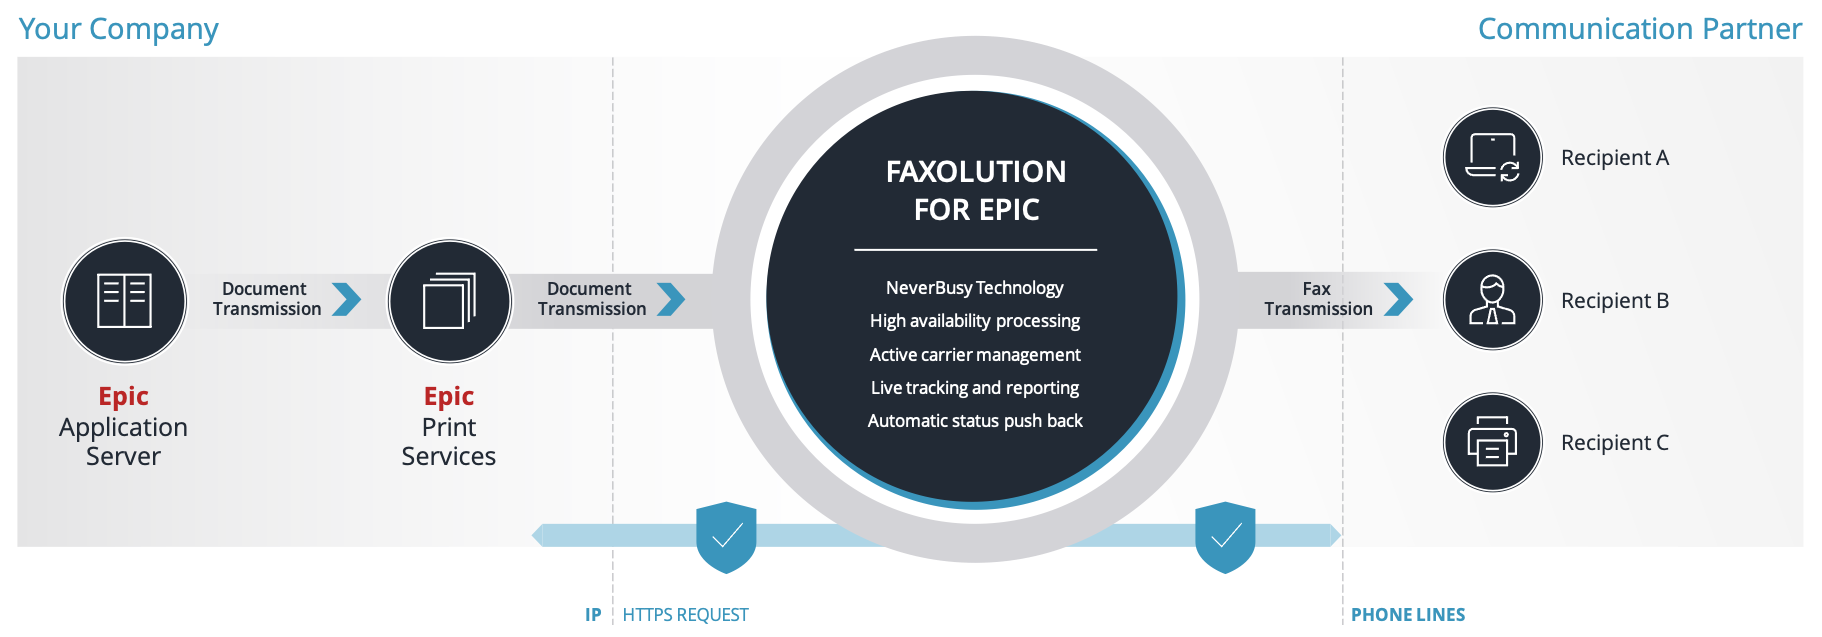 Faxolution for Epic process